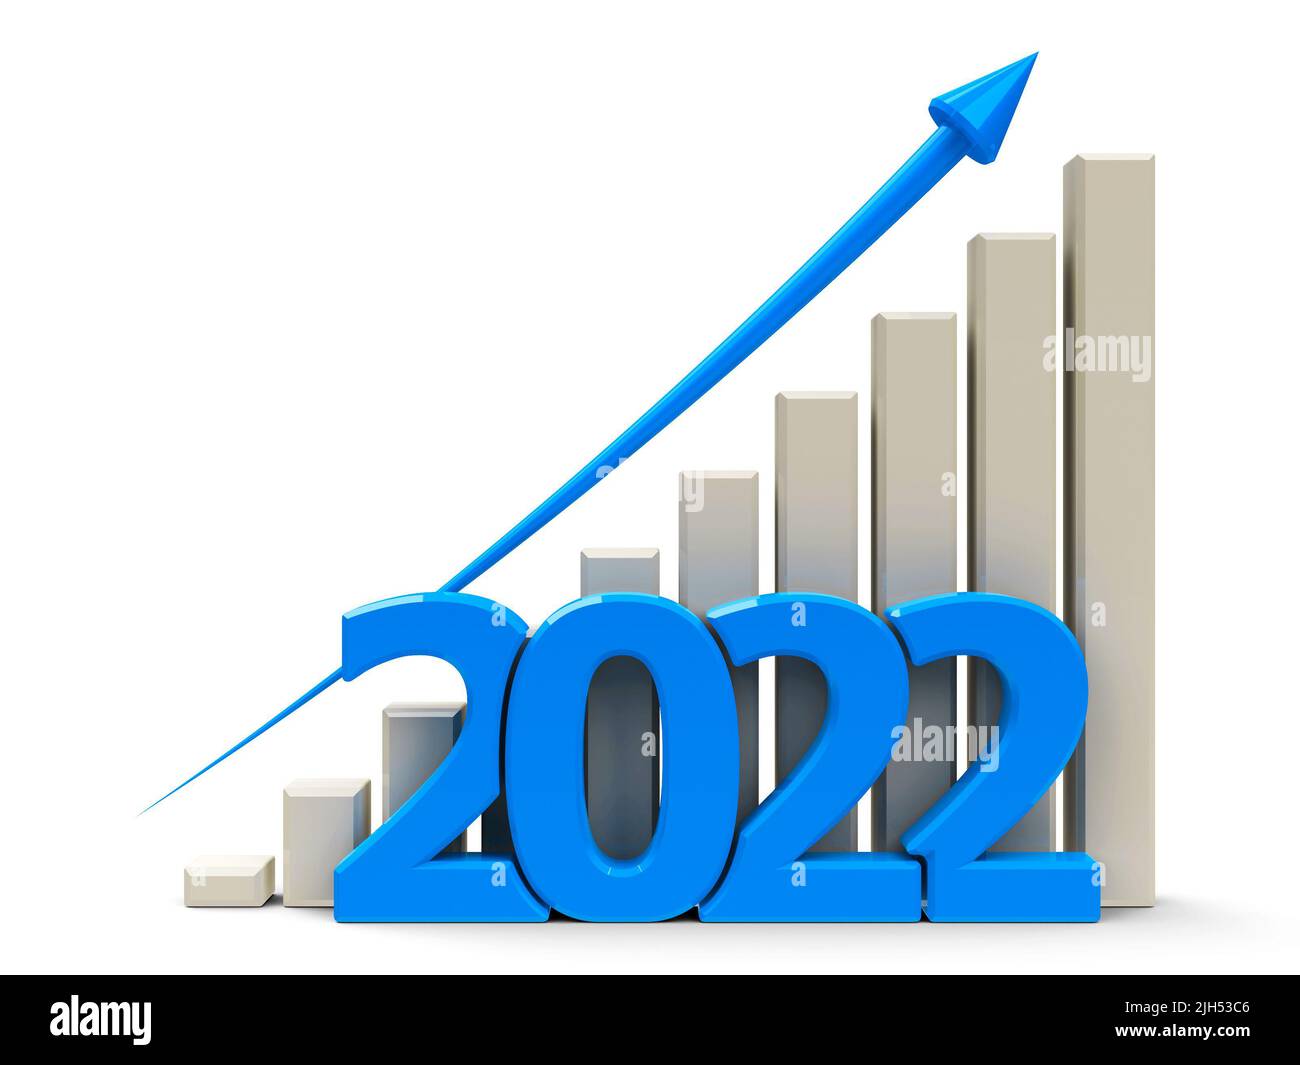 Blue business graph with blue arrow up, represents growth in the year 2022, three-dimensional rendering, 3D illustration Stock Photo